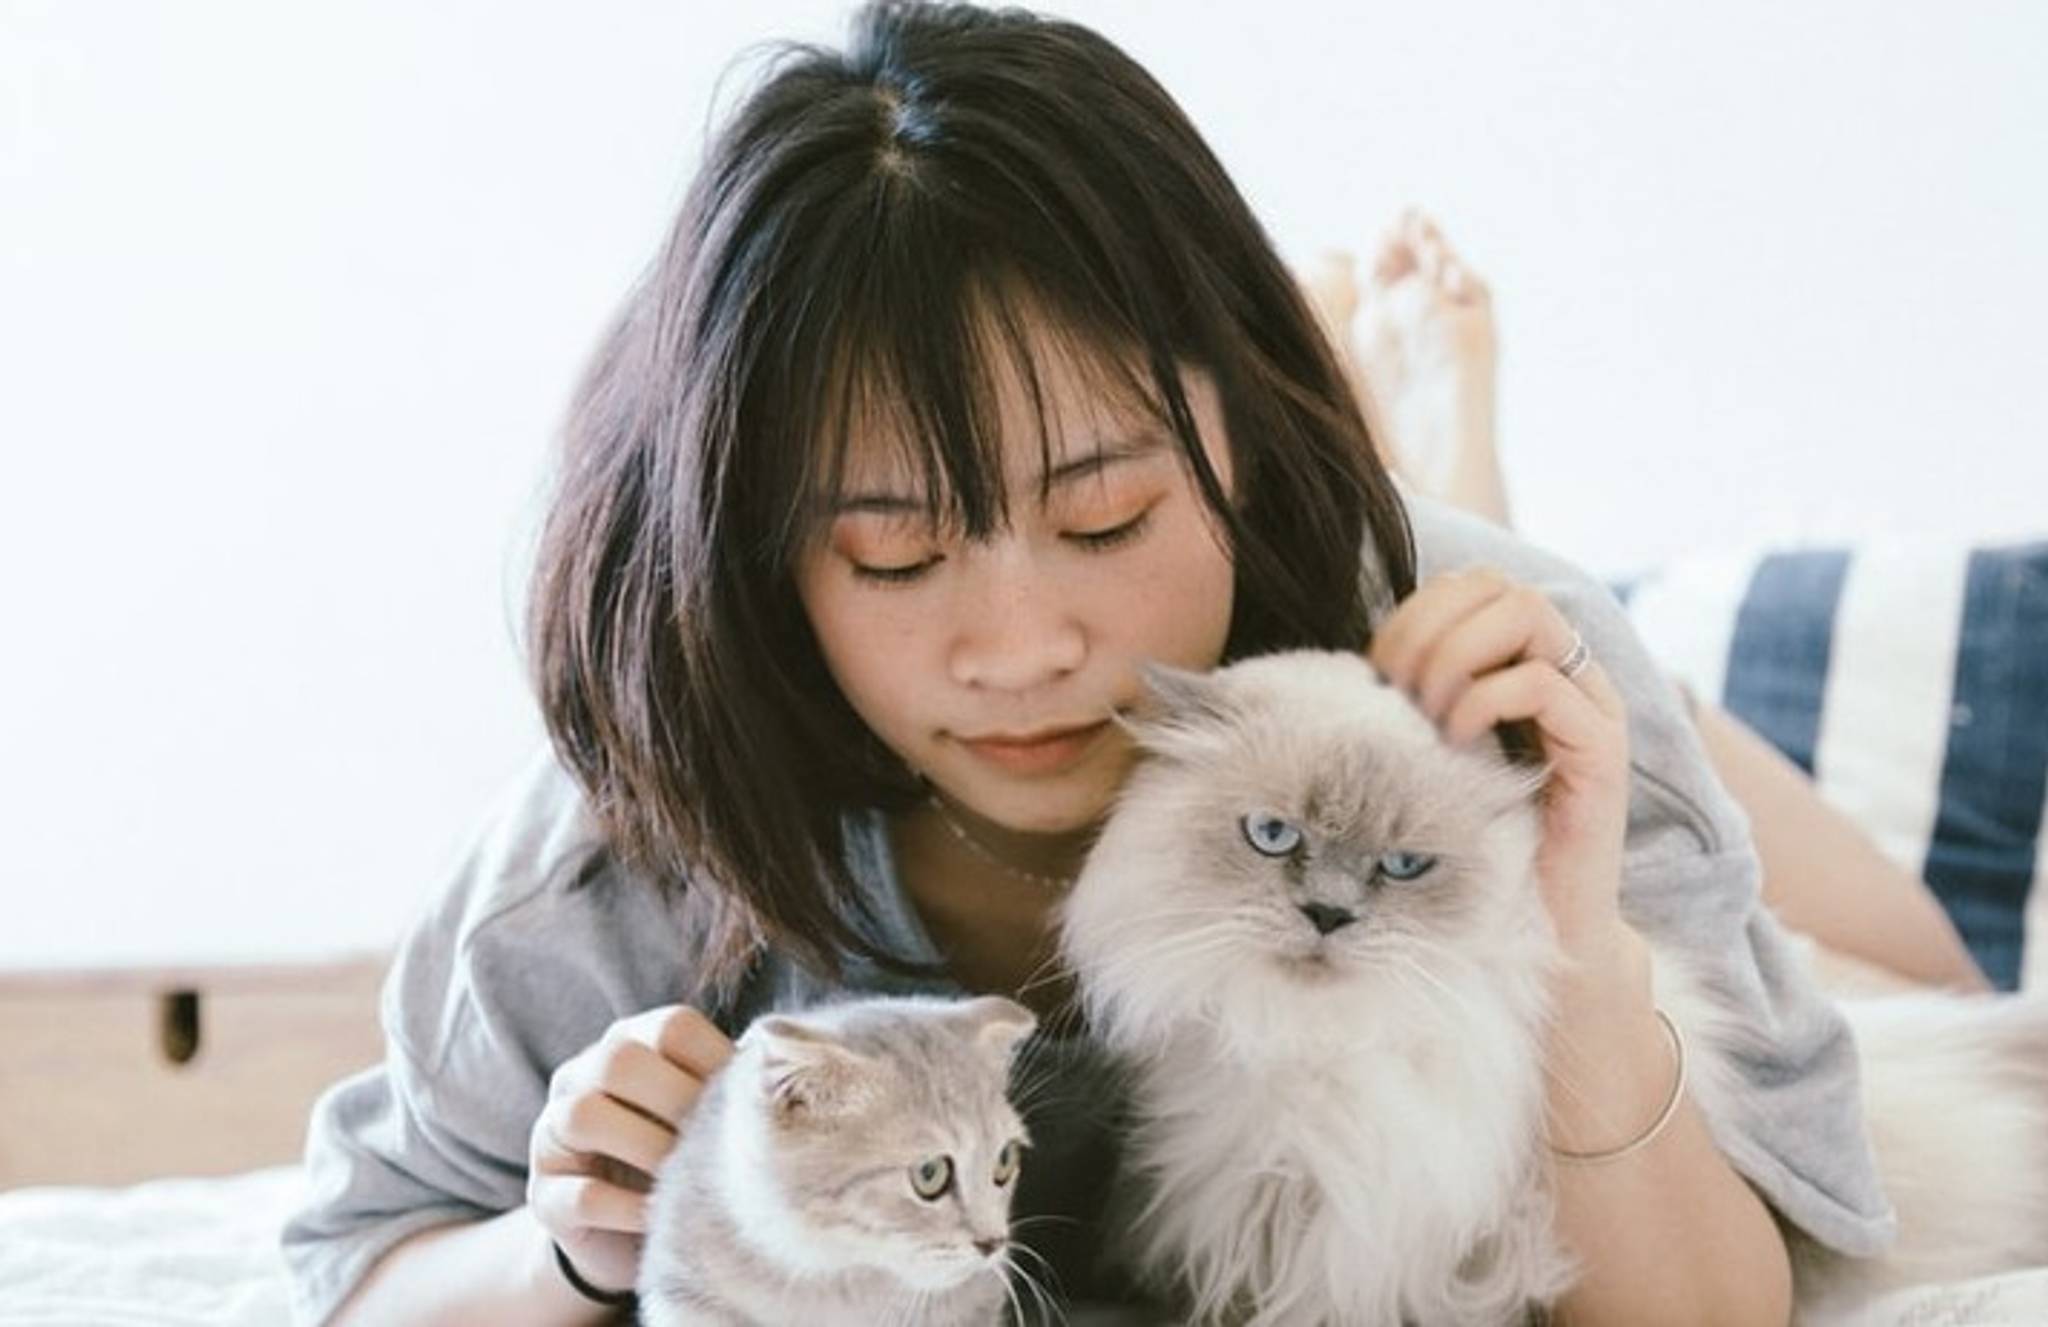 Chinese pet owners take pampering to new heights